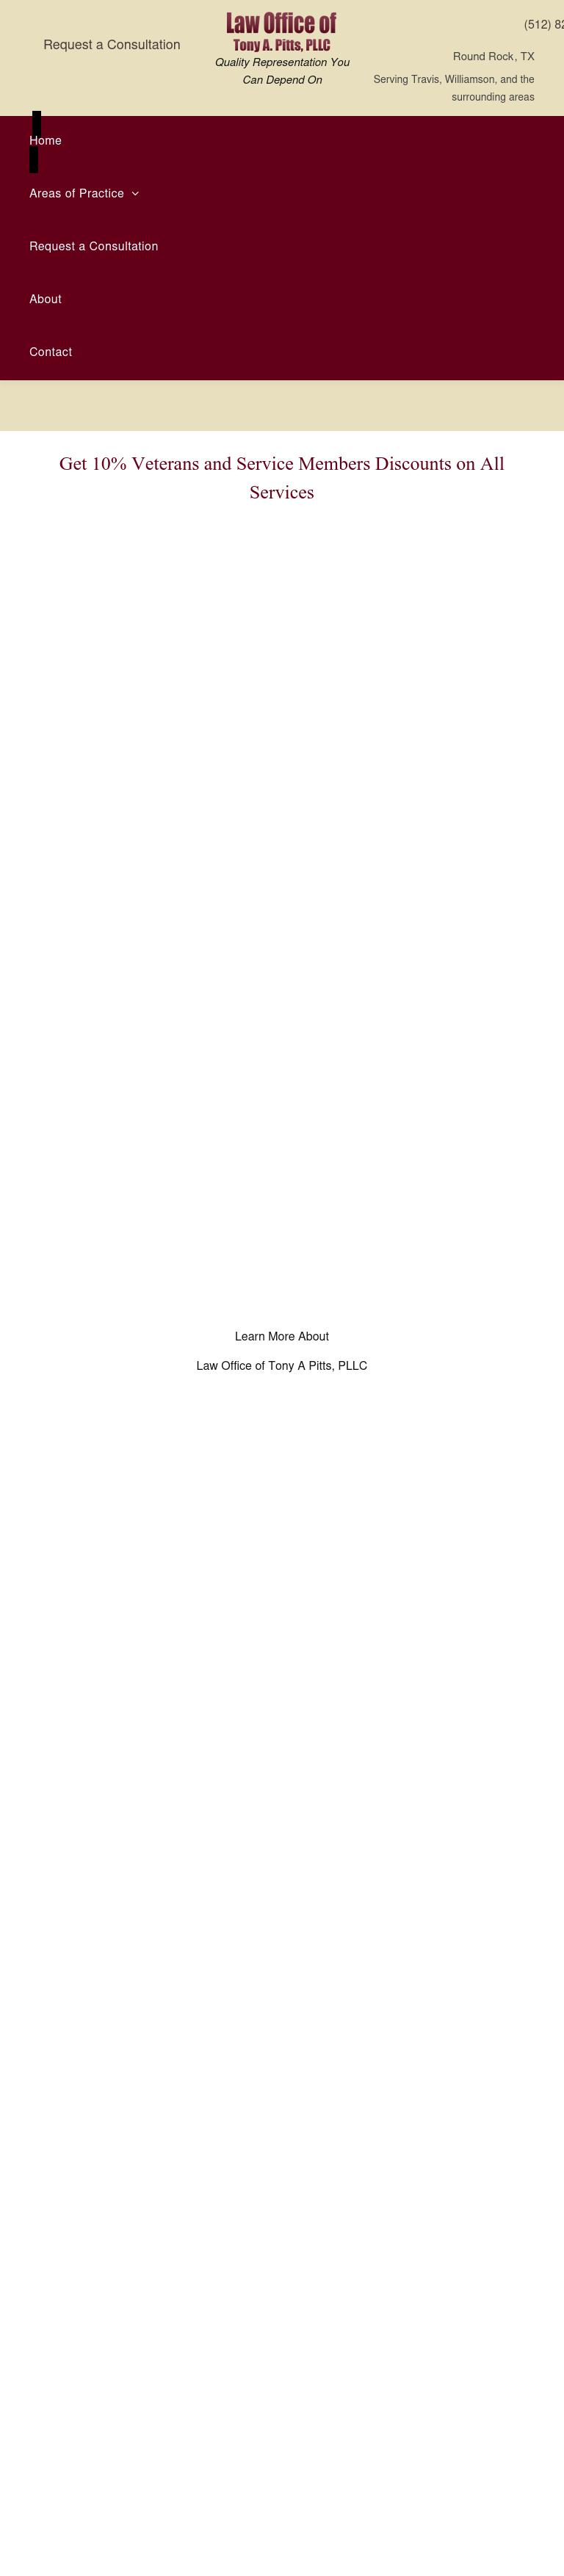 Law Office of Tony A. Pitts - Round Rock TX Lawyers